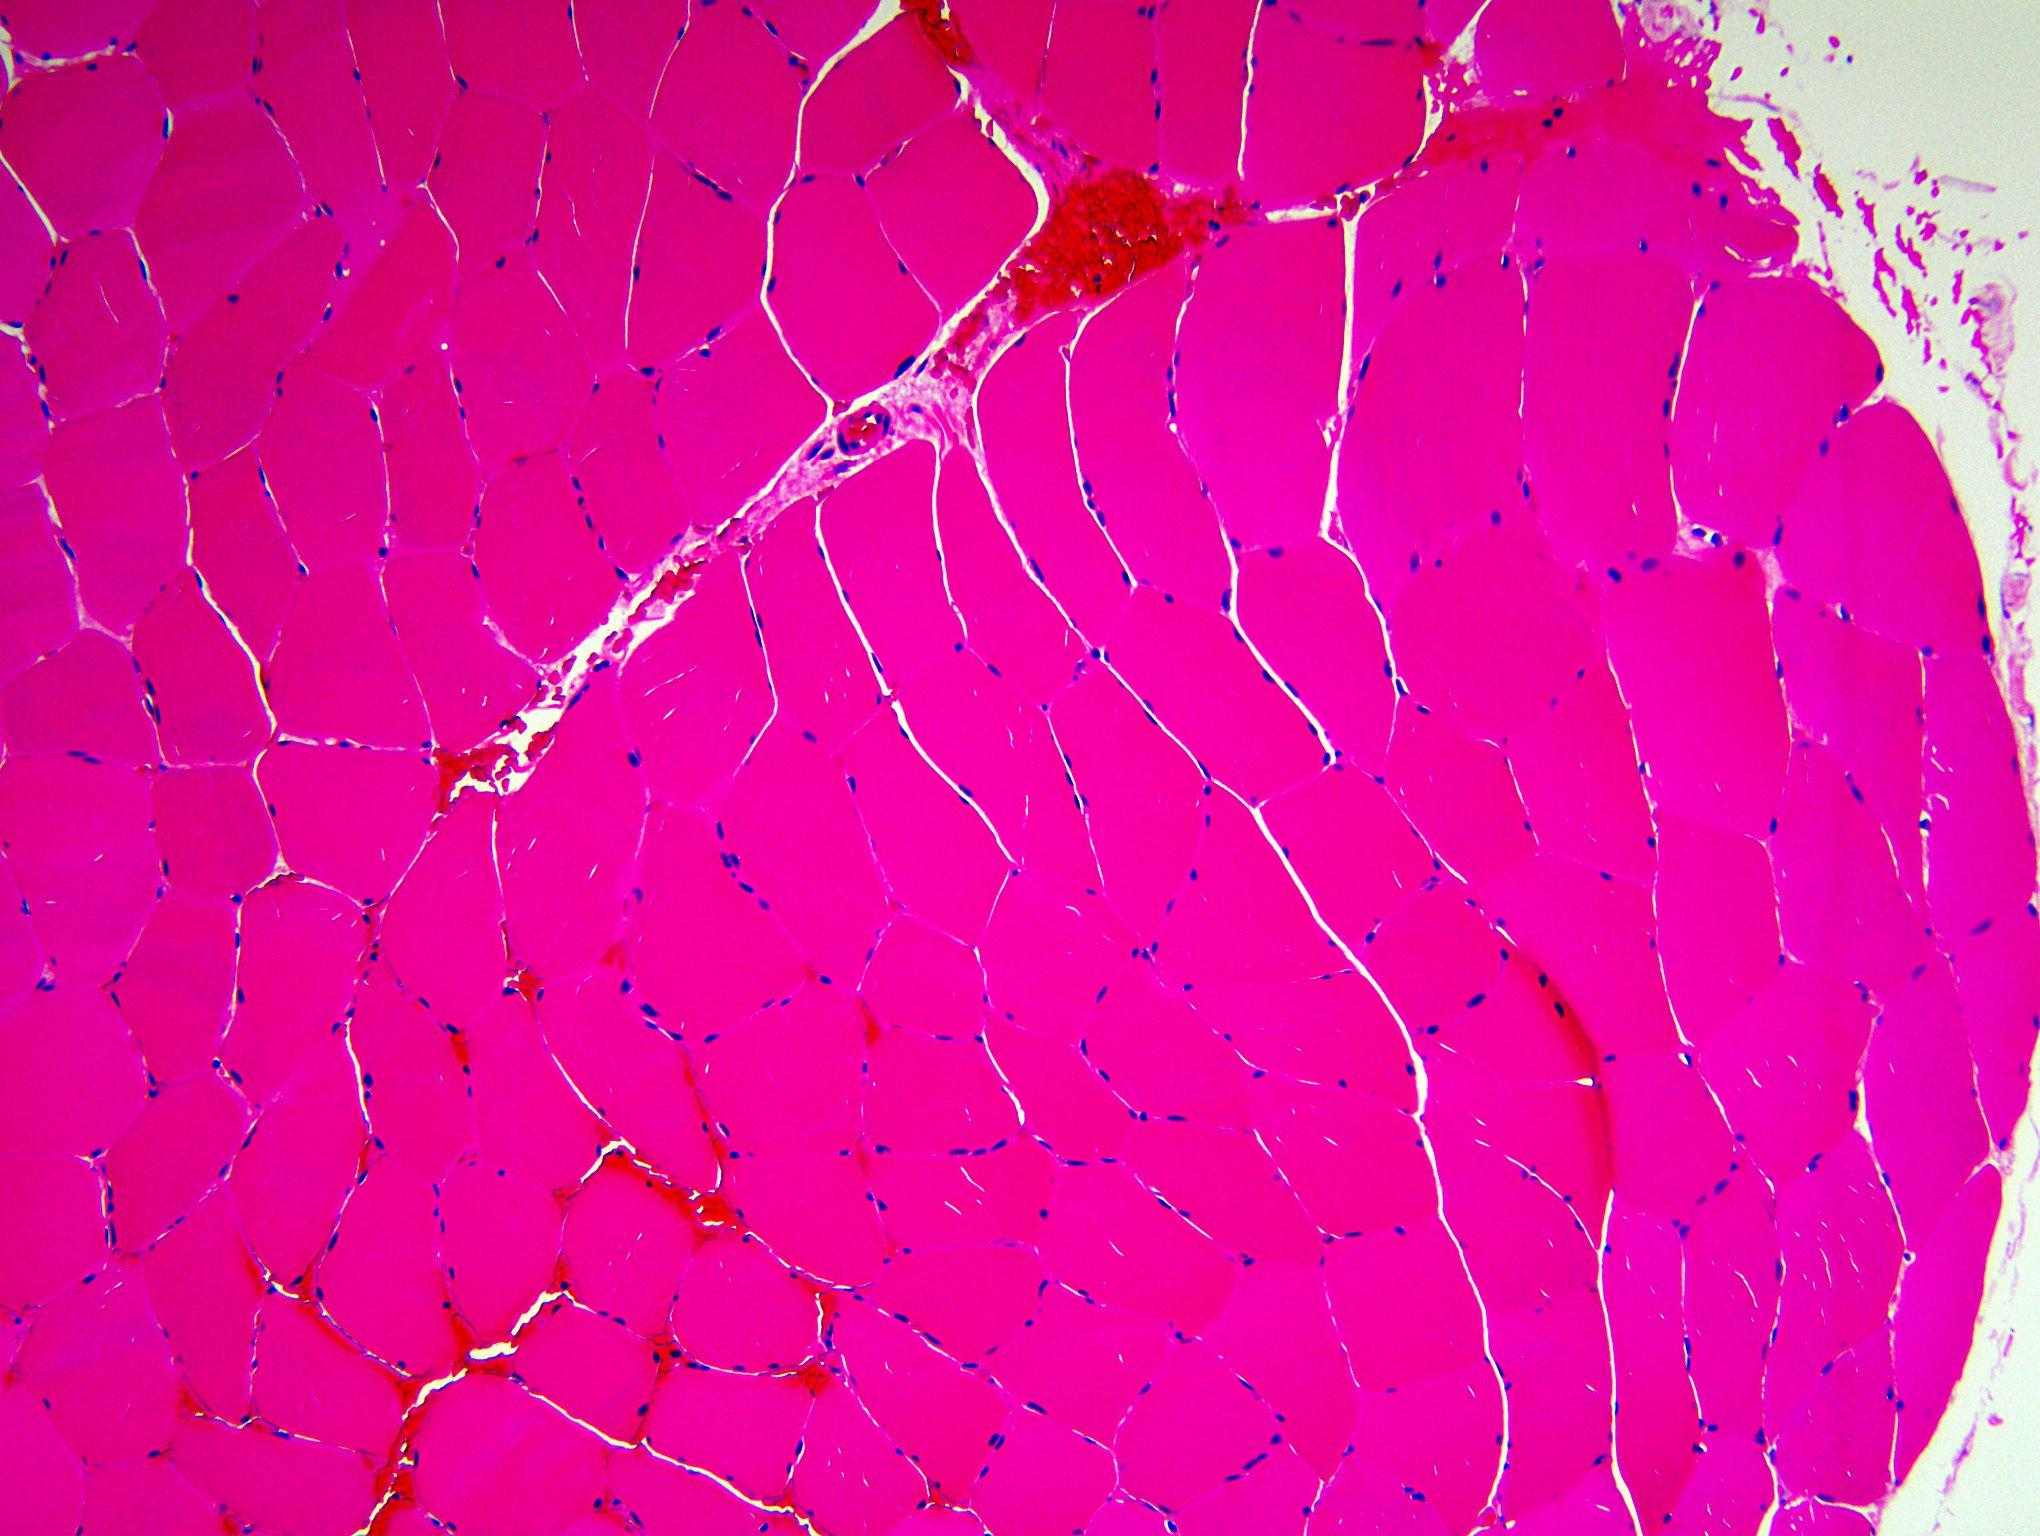  Normal skeletal muscle, H&E stained section of paraffin embedded tissue x 100